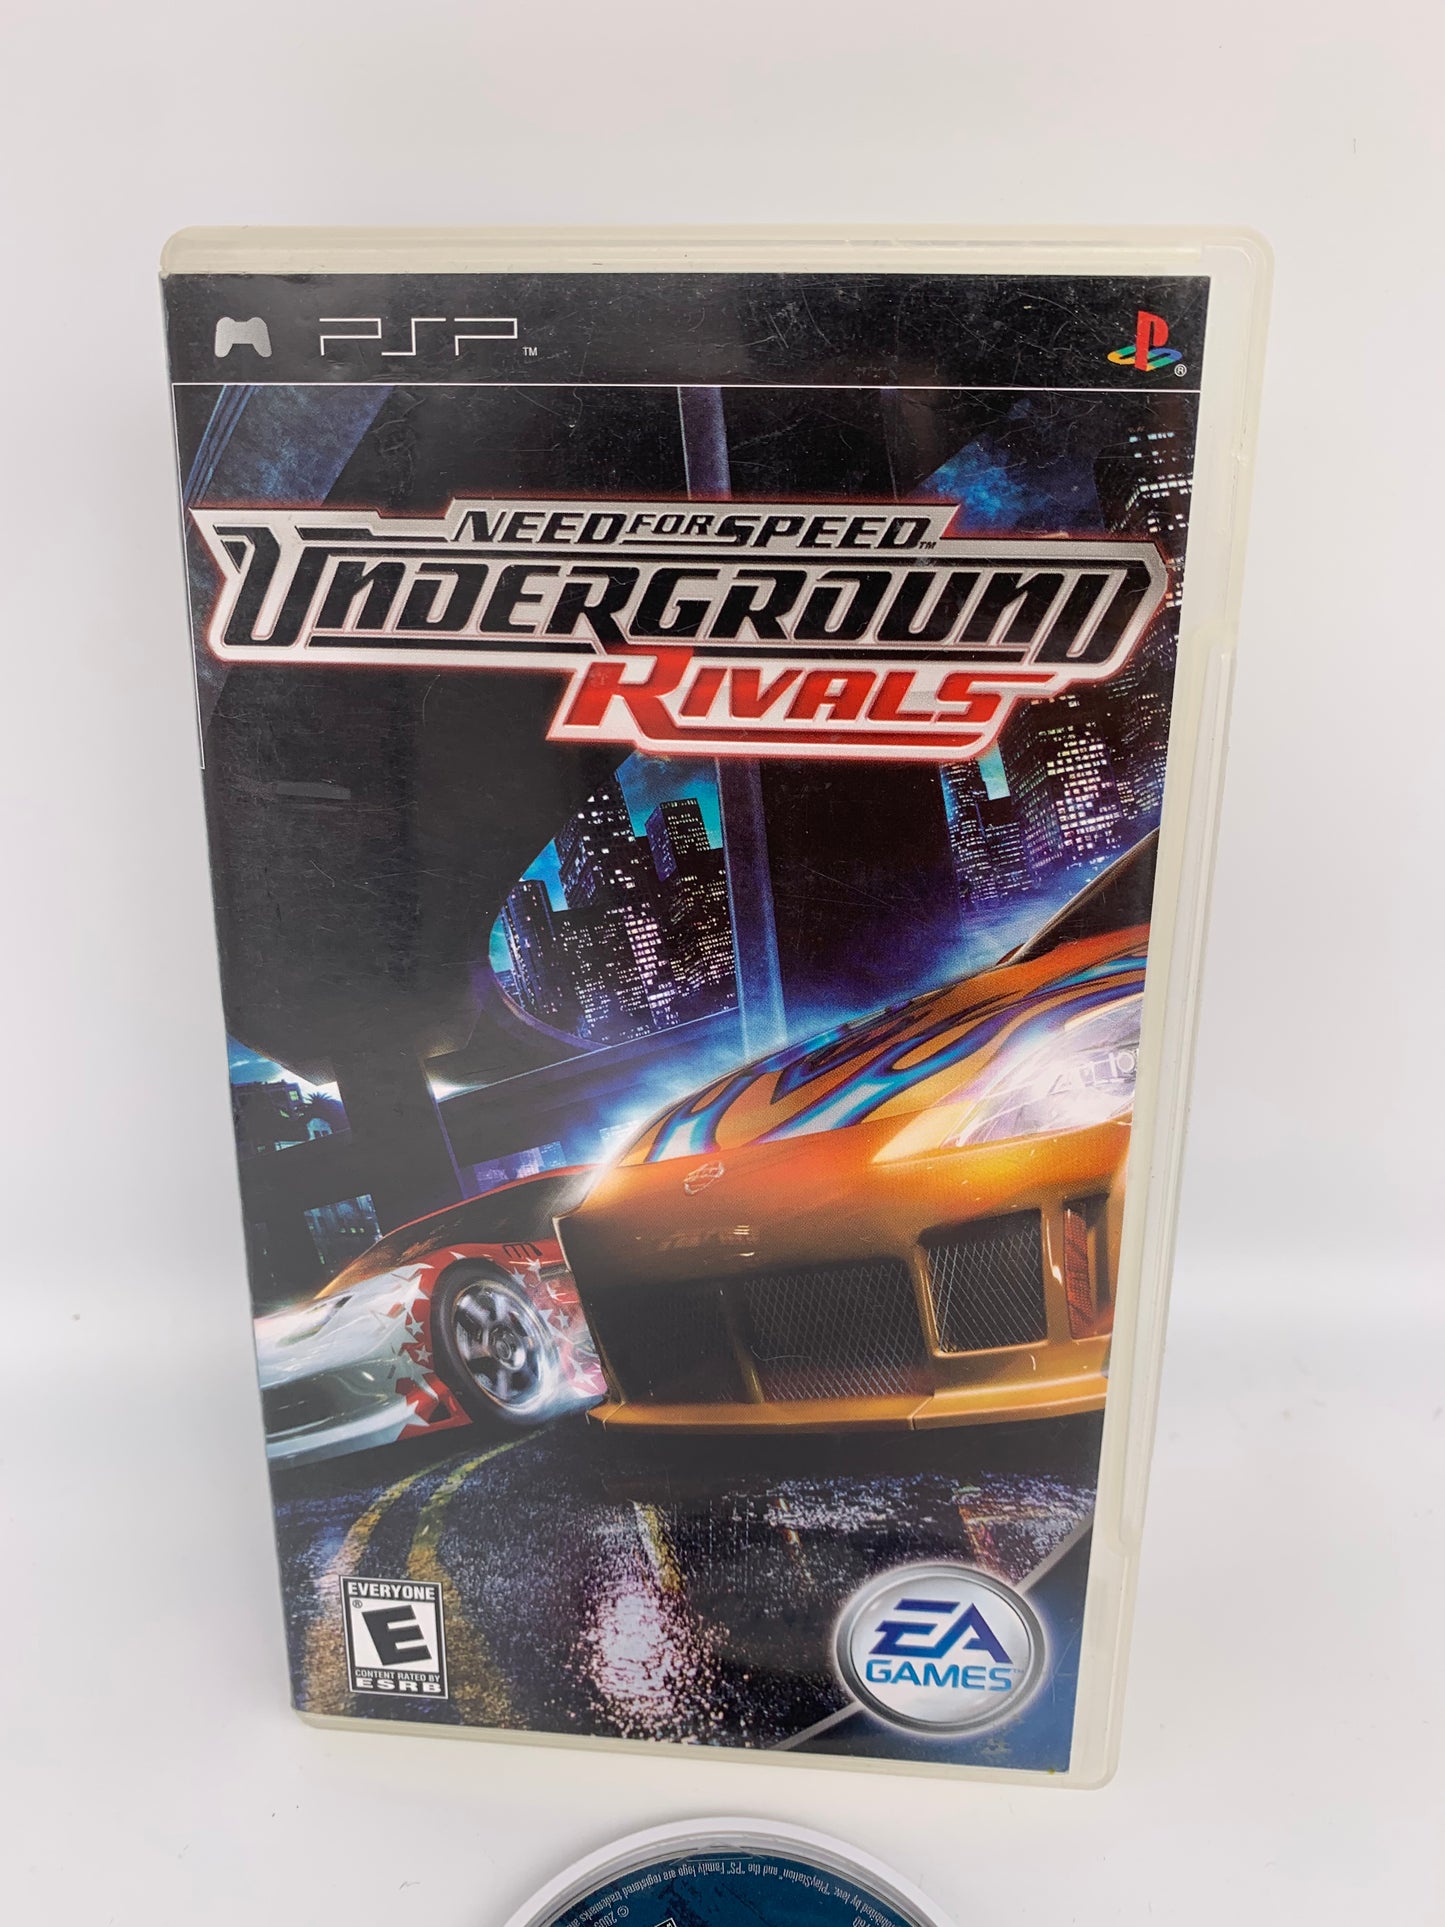 SONY PLAYSTATiON PORTABLE [PSP] | NEED FOR SPEED UNDERGROUND RiVALS